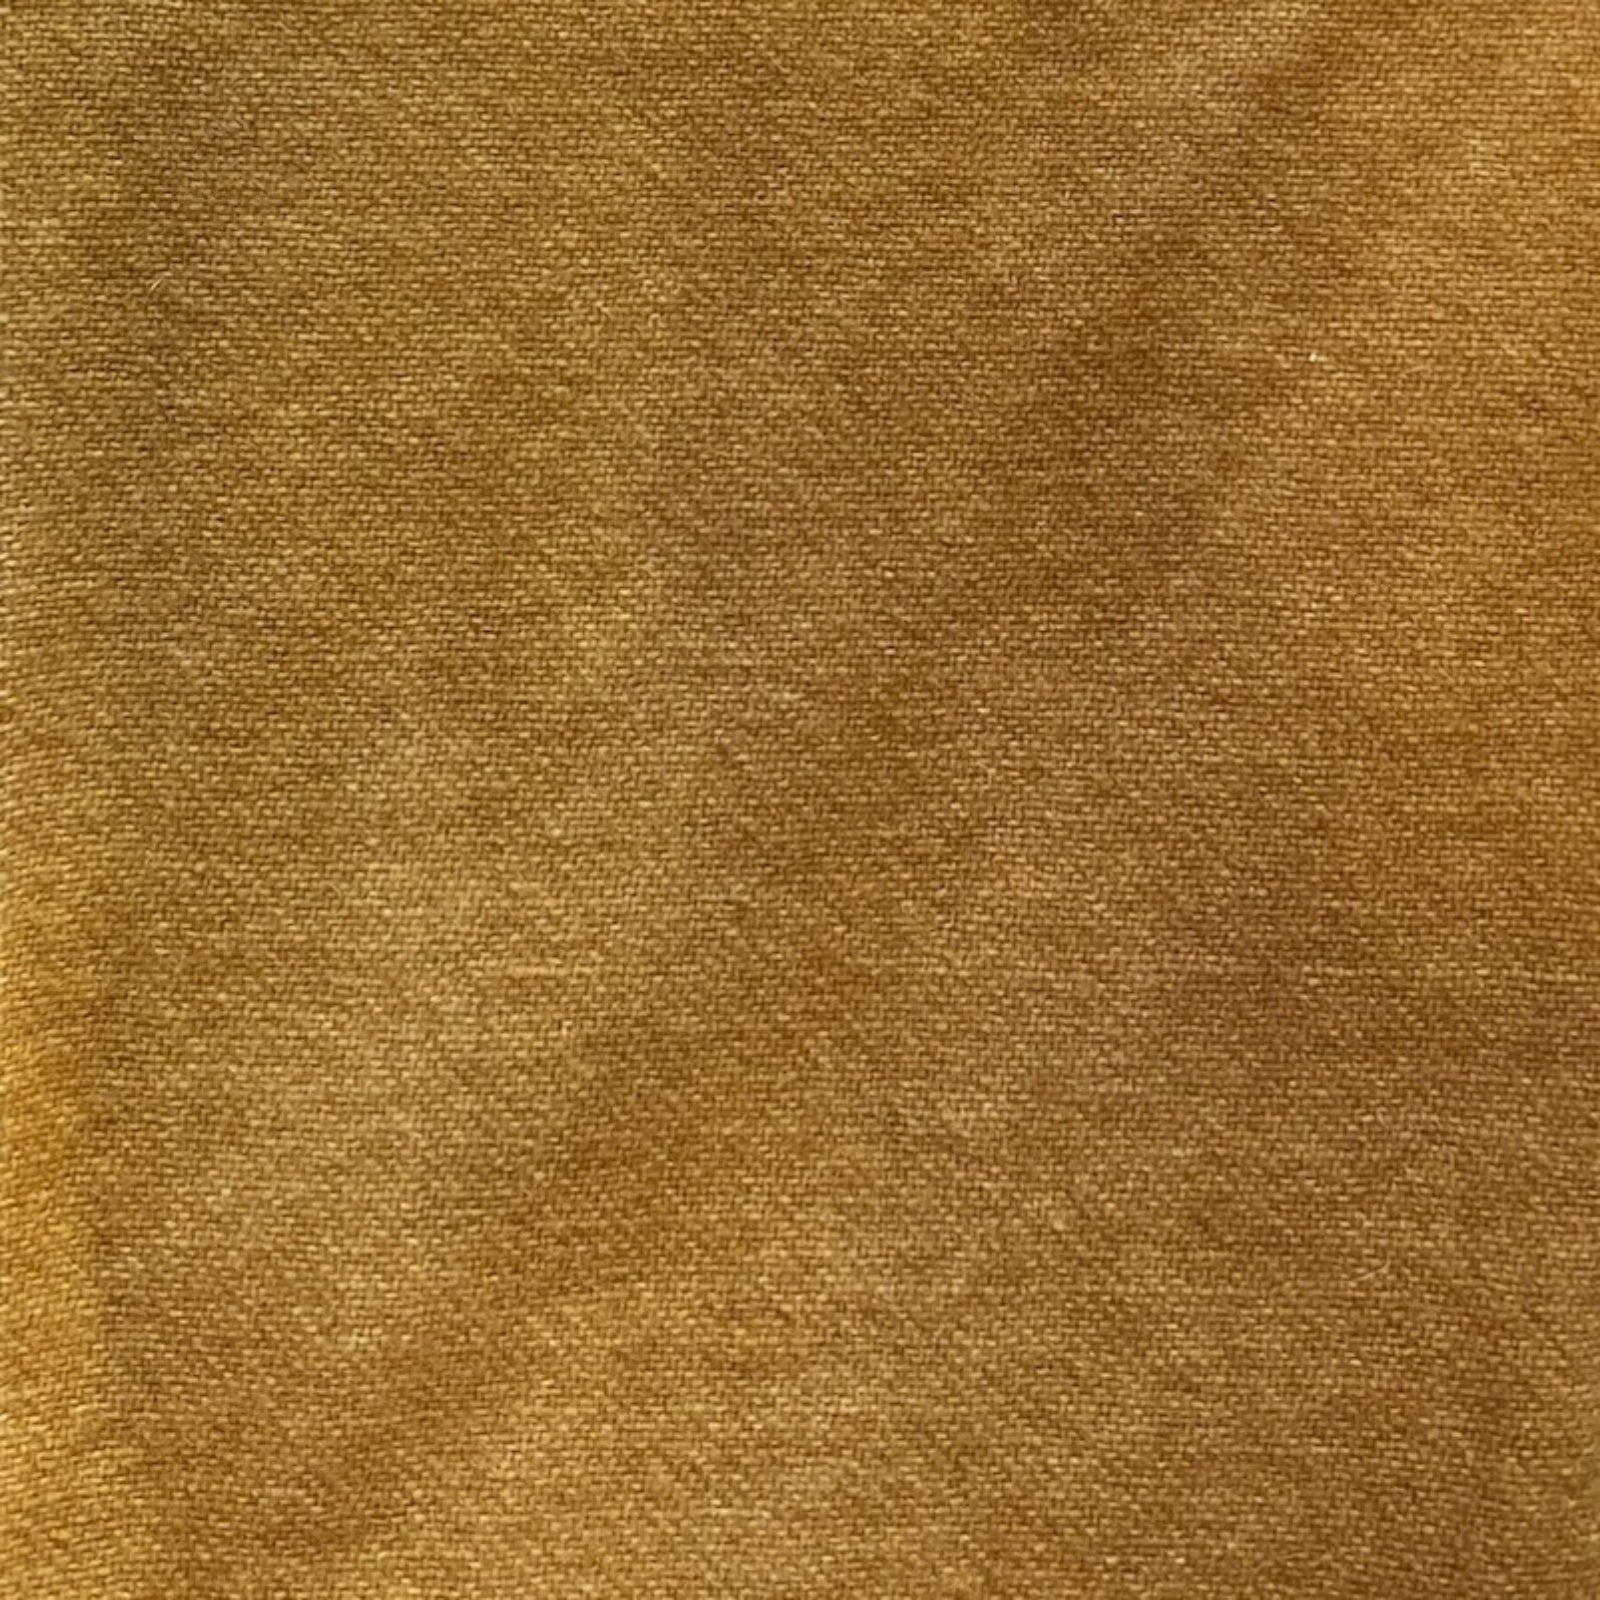 Aged Linen Dark - Colorama Hand Dyed Wool - Offered by HoneyBee Hive Rug Hooking